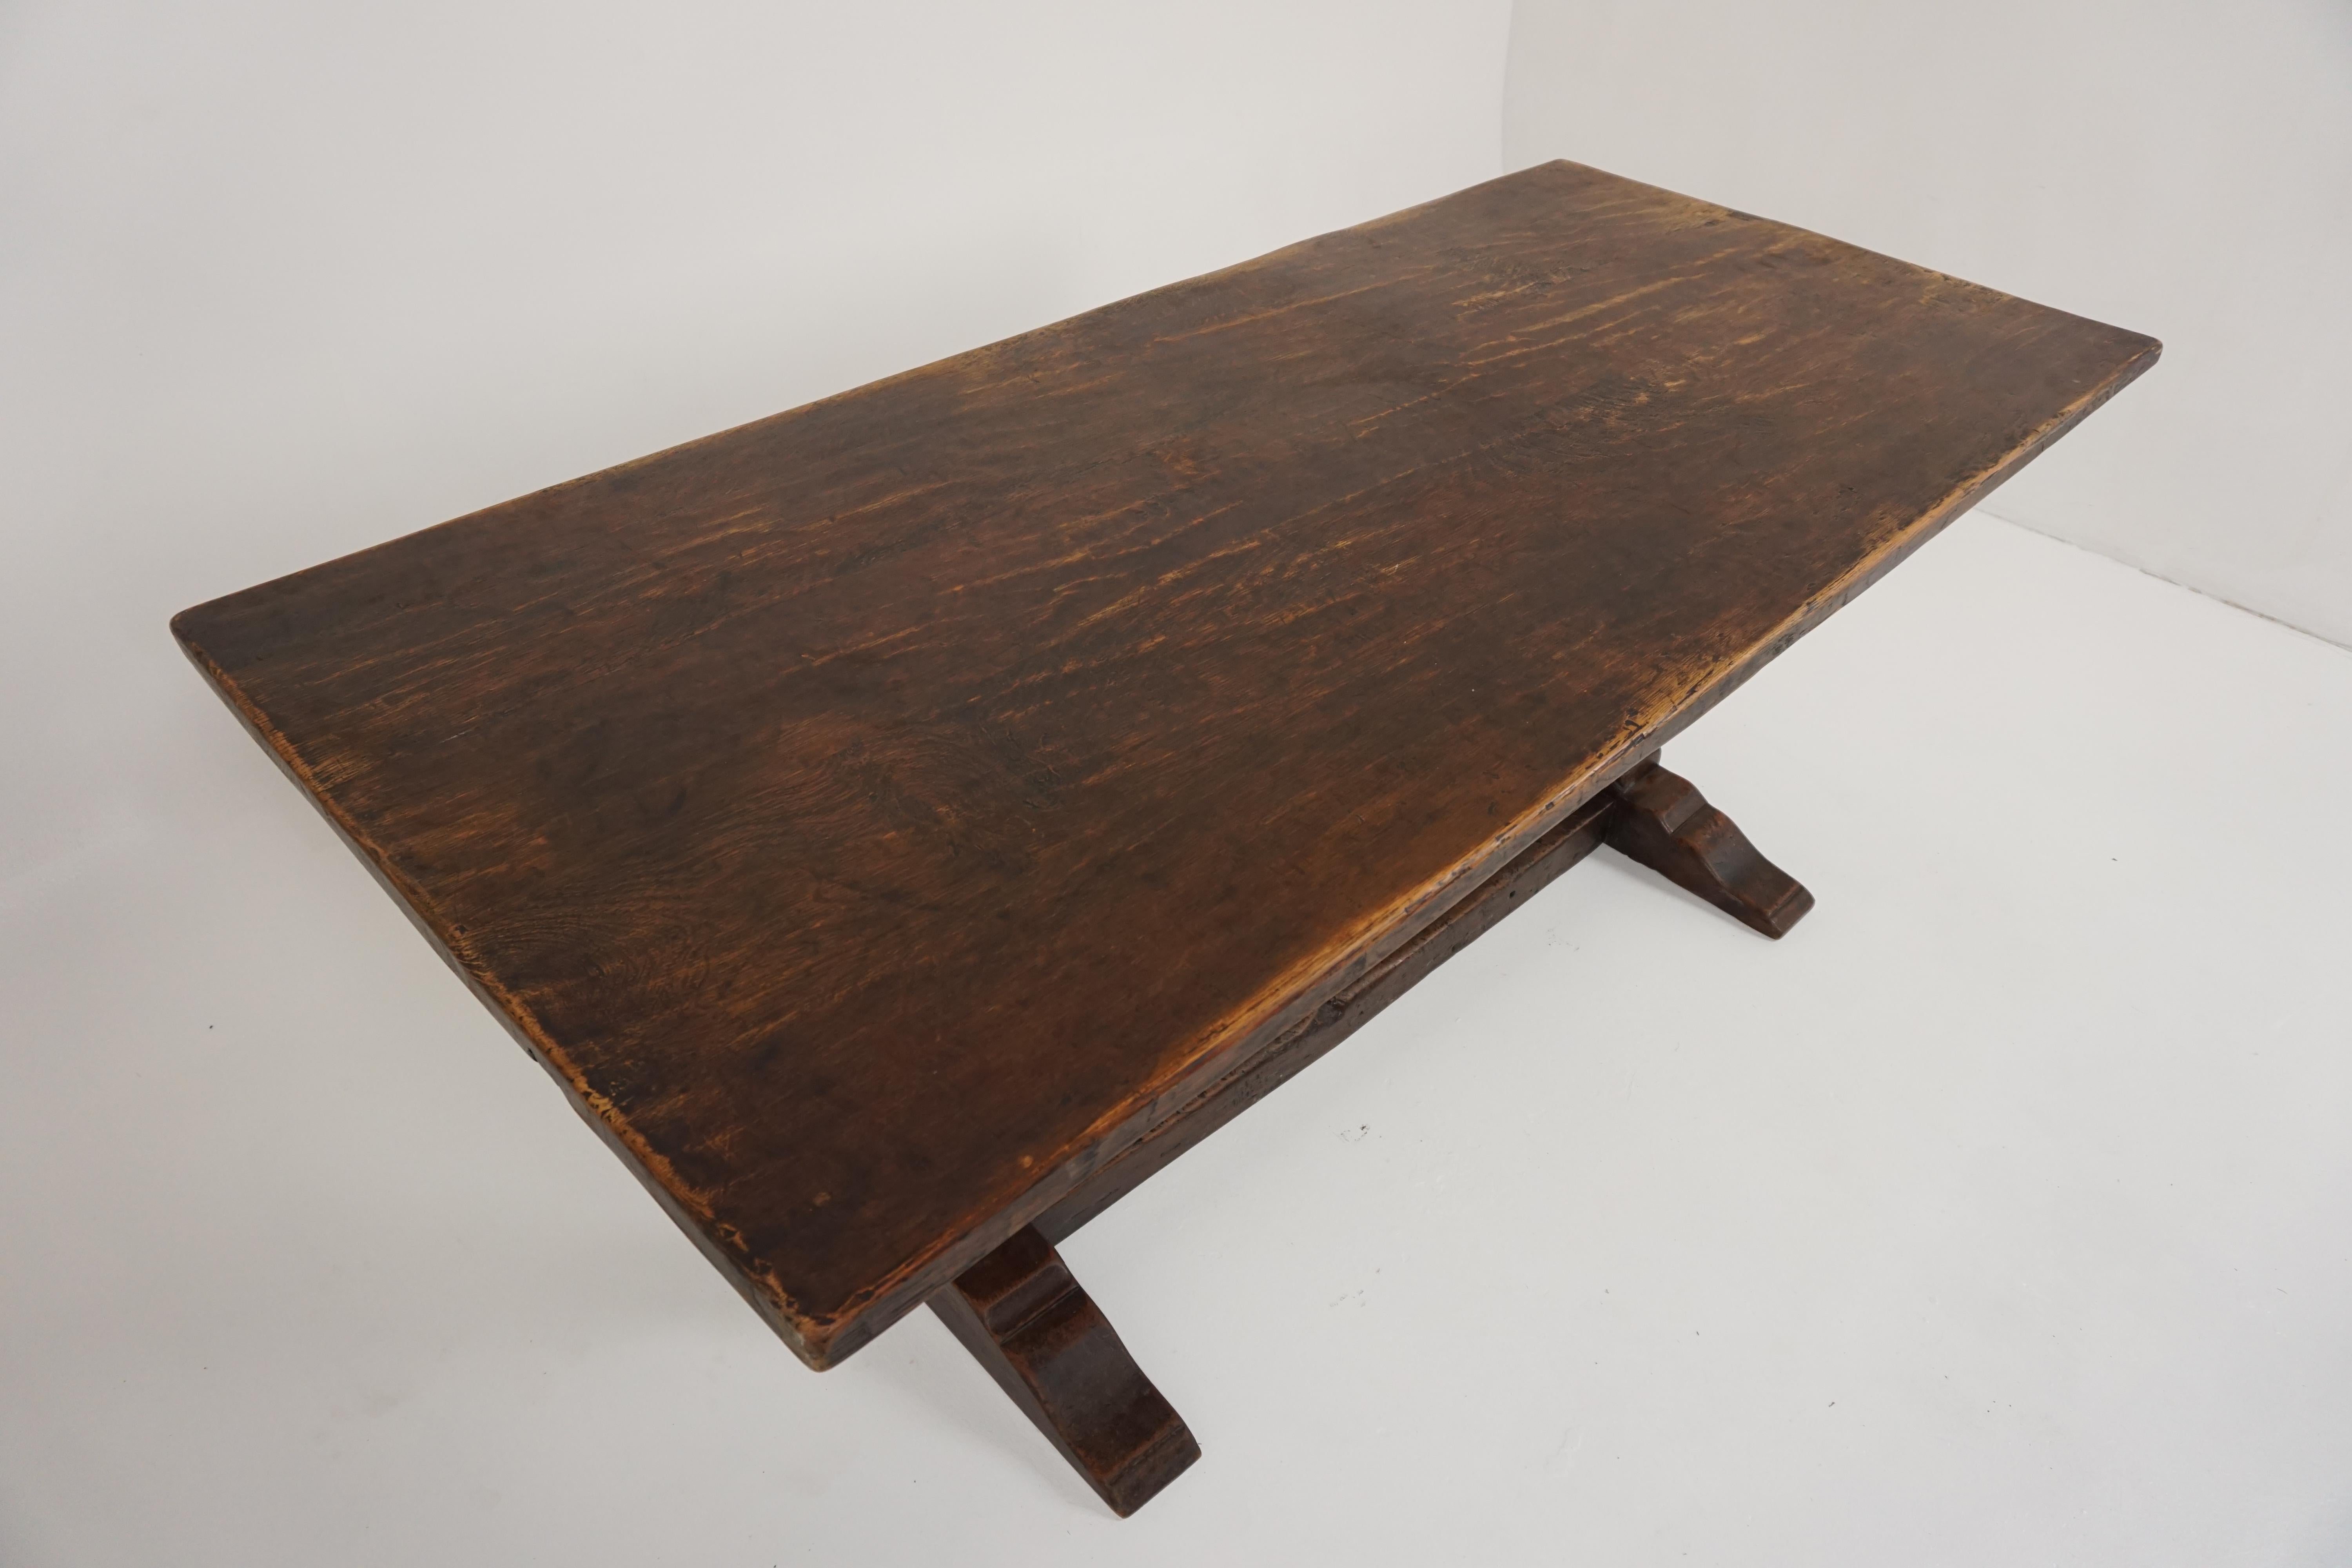 Antique refectory table, Victorian oak farmhouse dining table, Antique Furniture, Scotland, 1890, B1838

Scotland, 1890
Solid oak
Original finish
Solid 3 plan rectangular top
All supported by two large turned baluster supports with platform